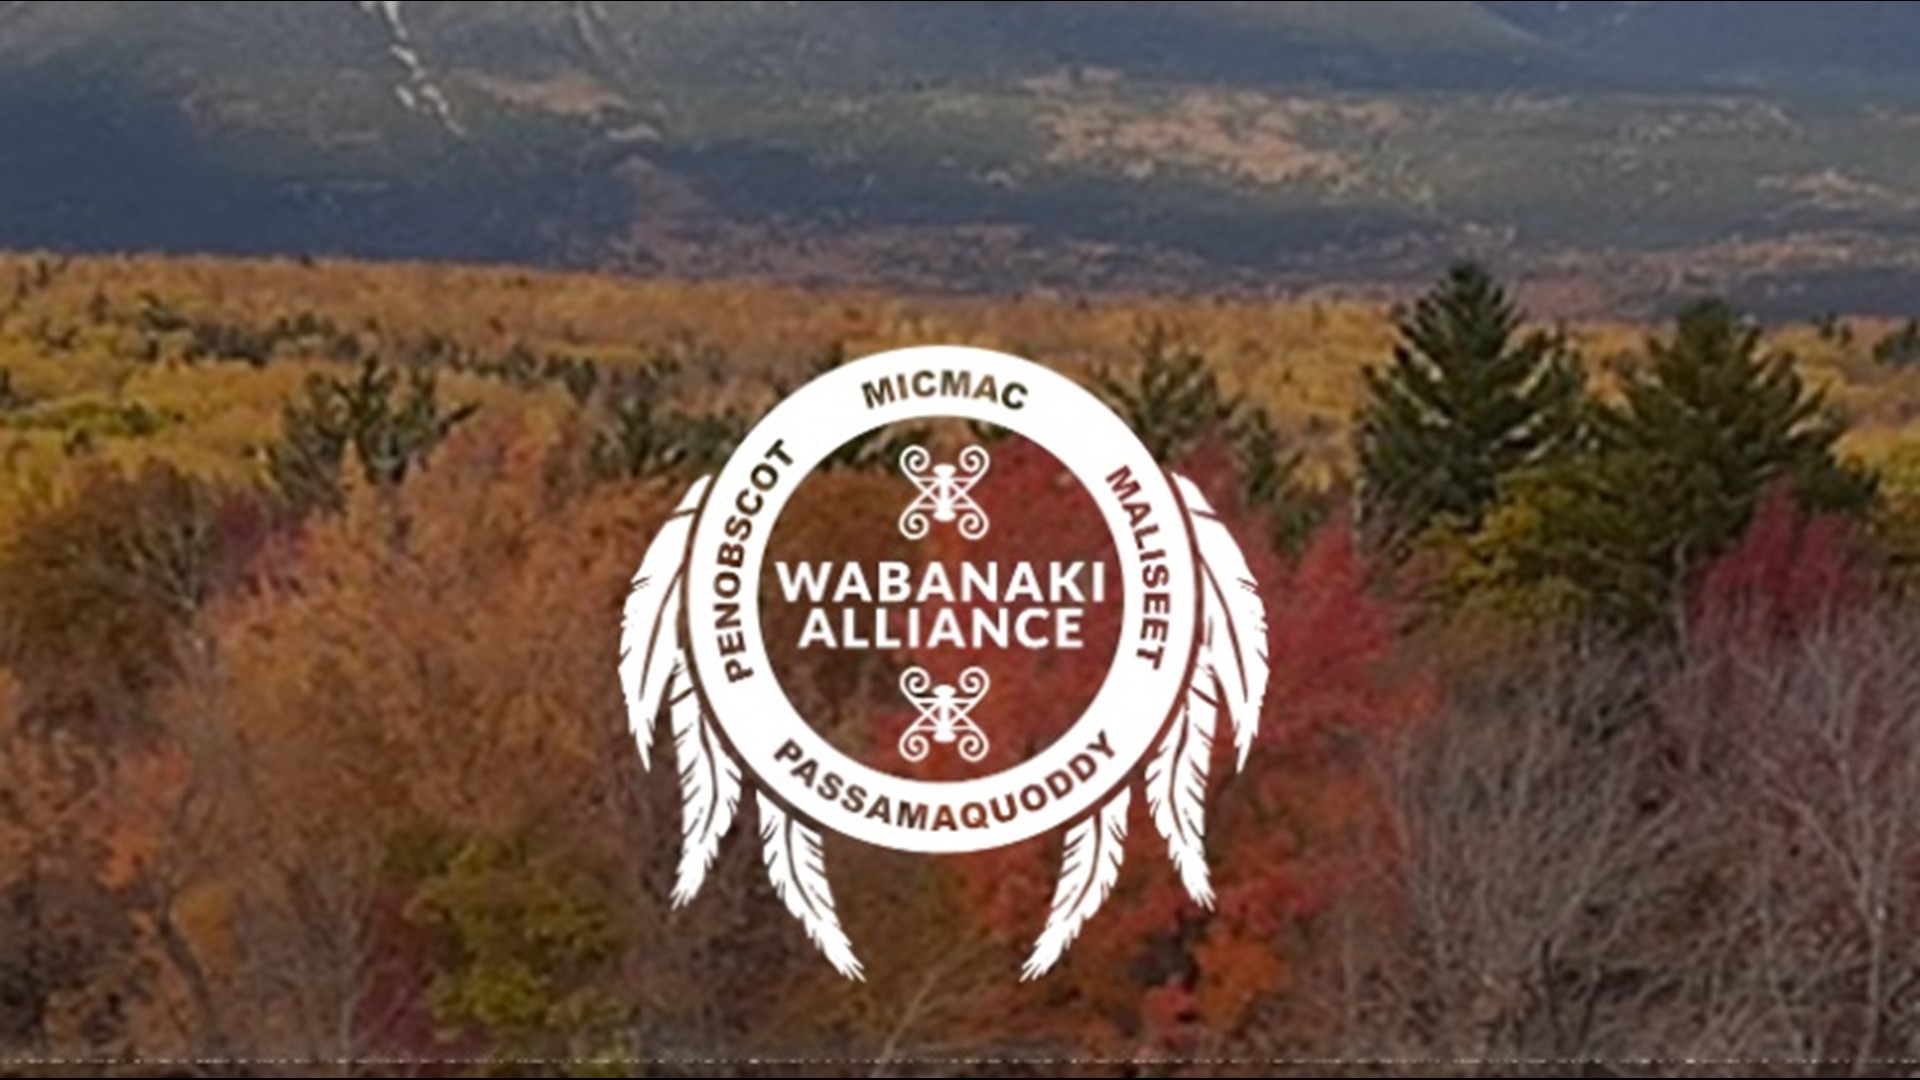 Maine lawmakers convened for the Joint Convention of the Maine Legislature on Thursday to hear from leaders of the five Wabanaki tribes.